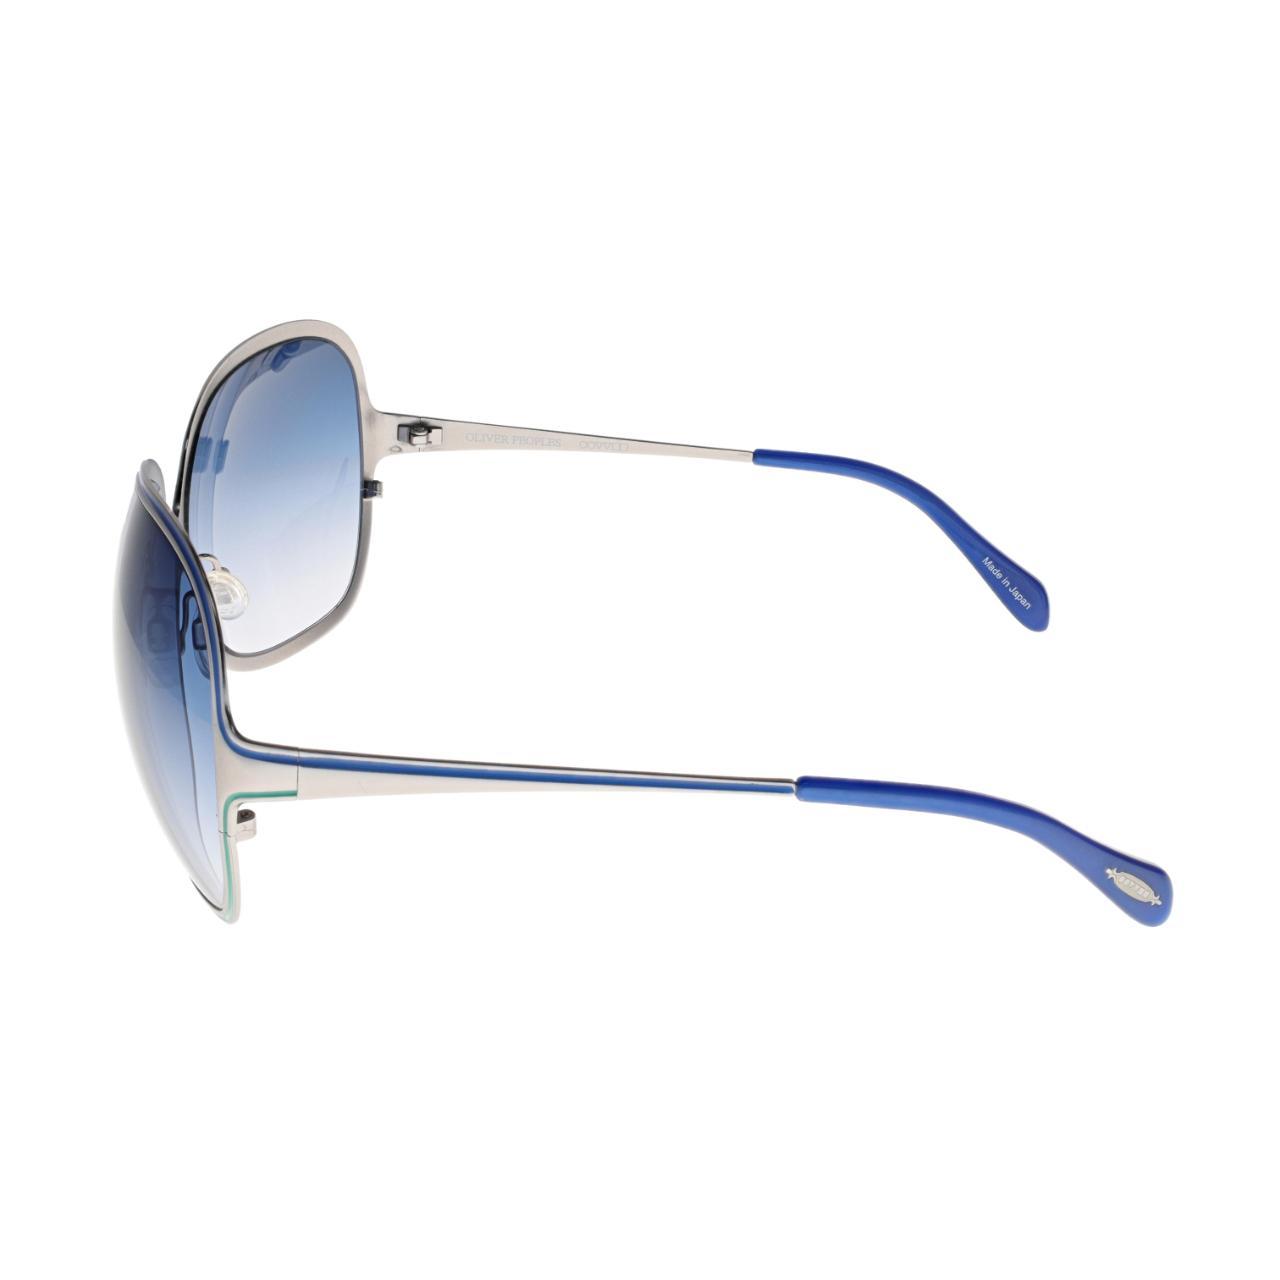 Oliver Peoples Women's Silver and Blue Sunglasses (3)